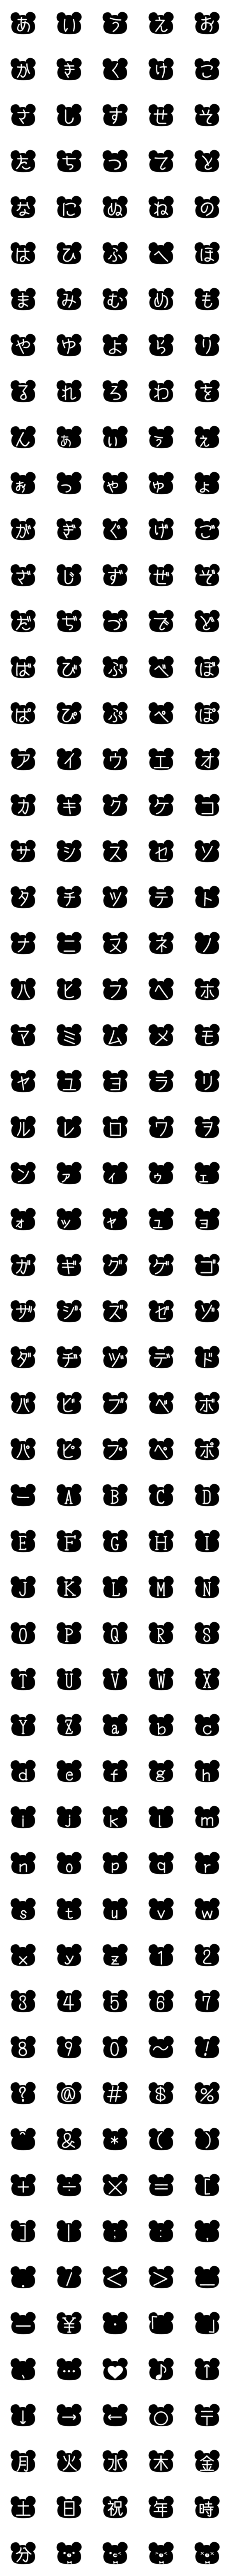 [LINE絵文字]くろくまのデコ文字＆絵文字の画像一覧